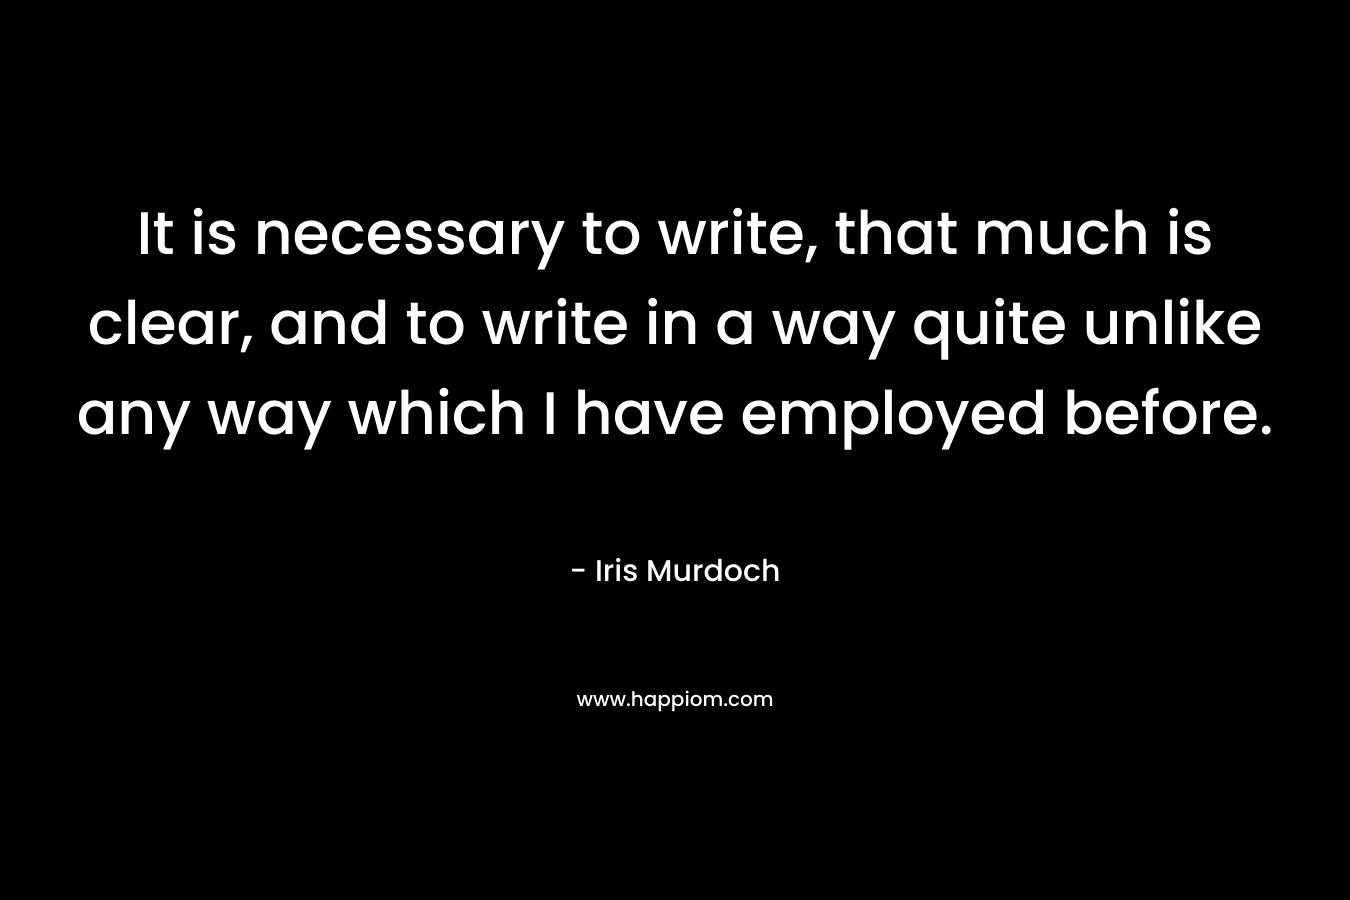 It is necessary to write, that much is clear, and to write in a way quite unlike any way which I have employed before. – Iris Murdoch